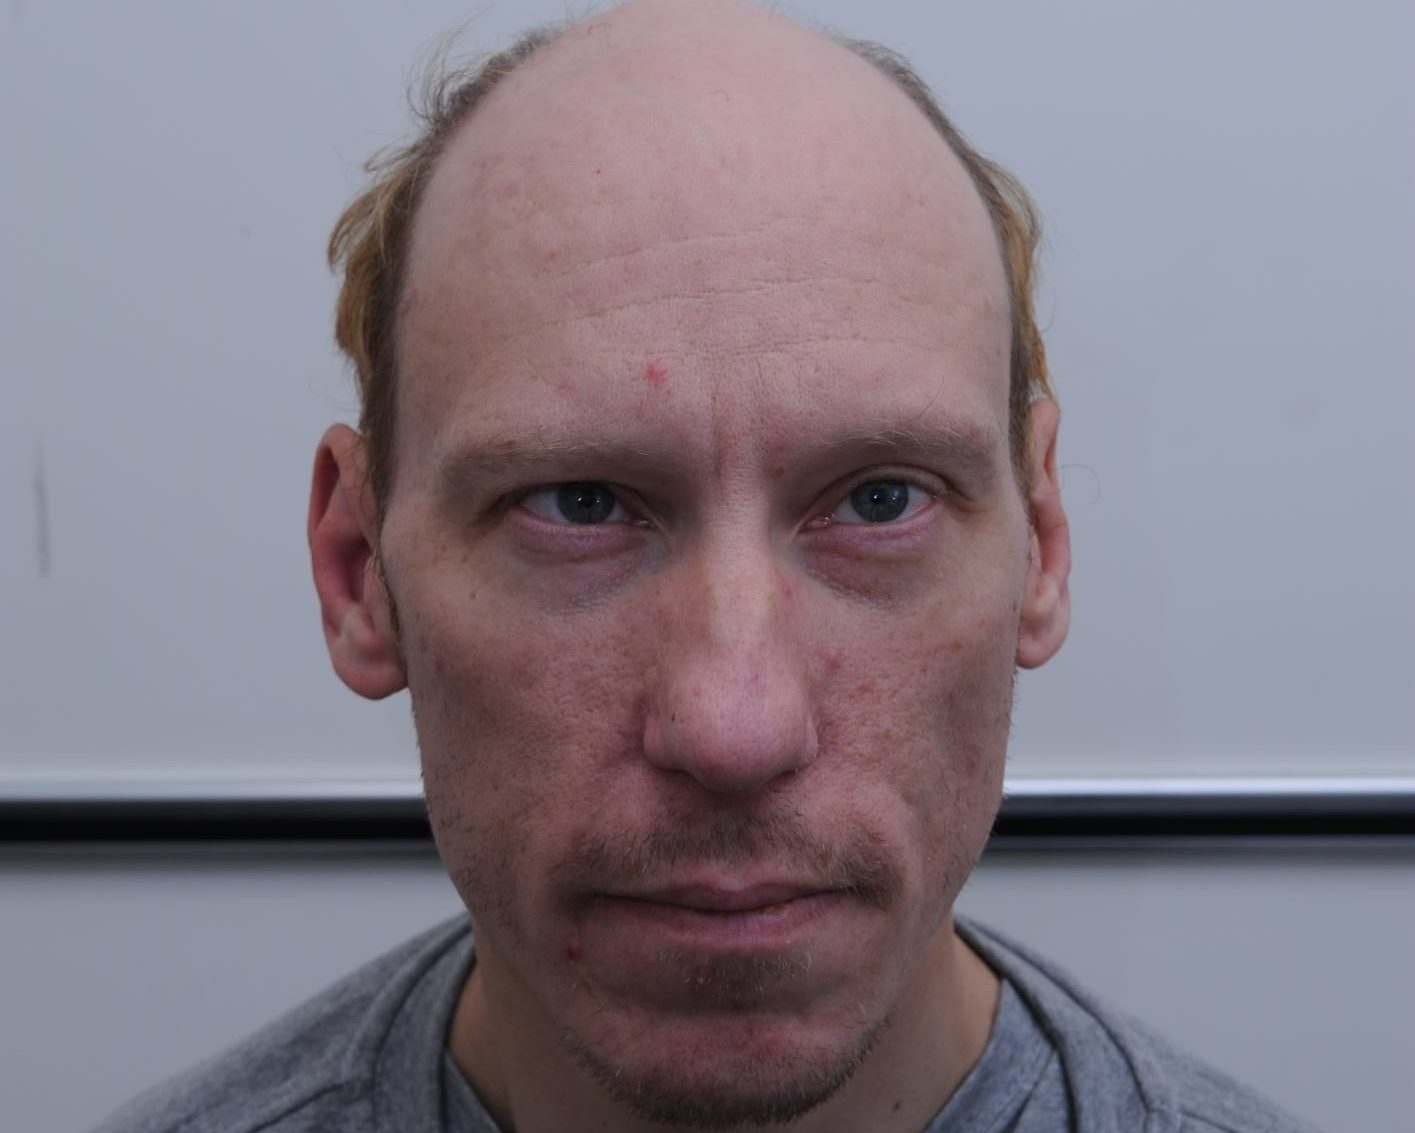 No police officer to face discipline over the investigation of the Stephen Port serial killings